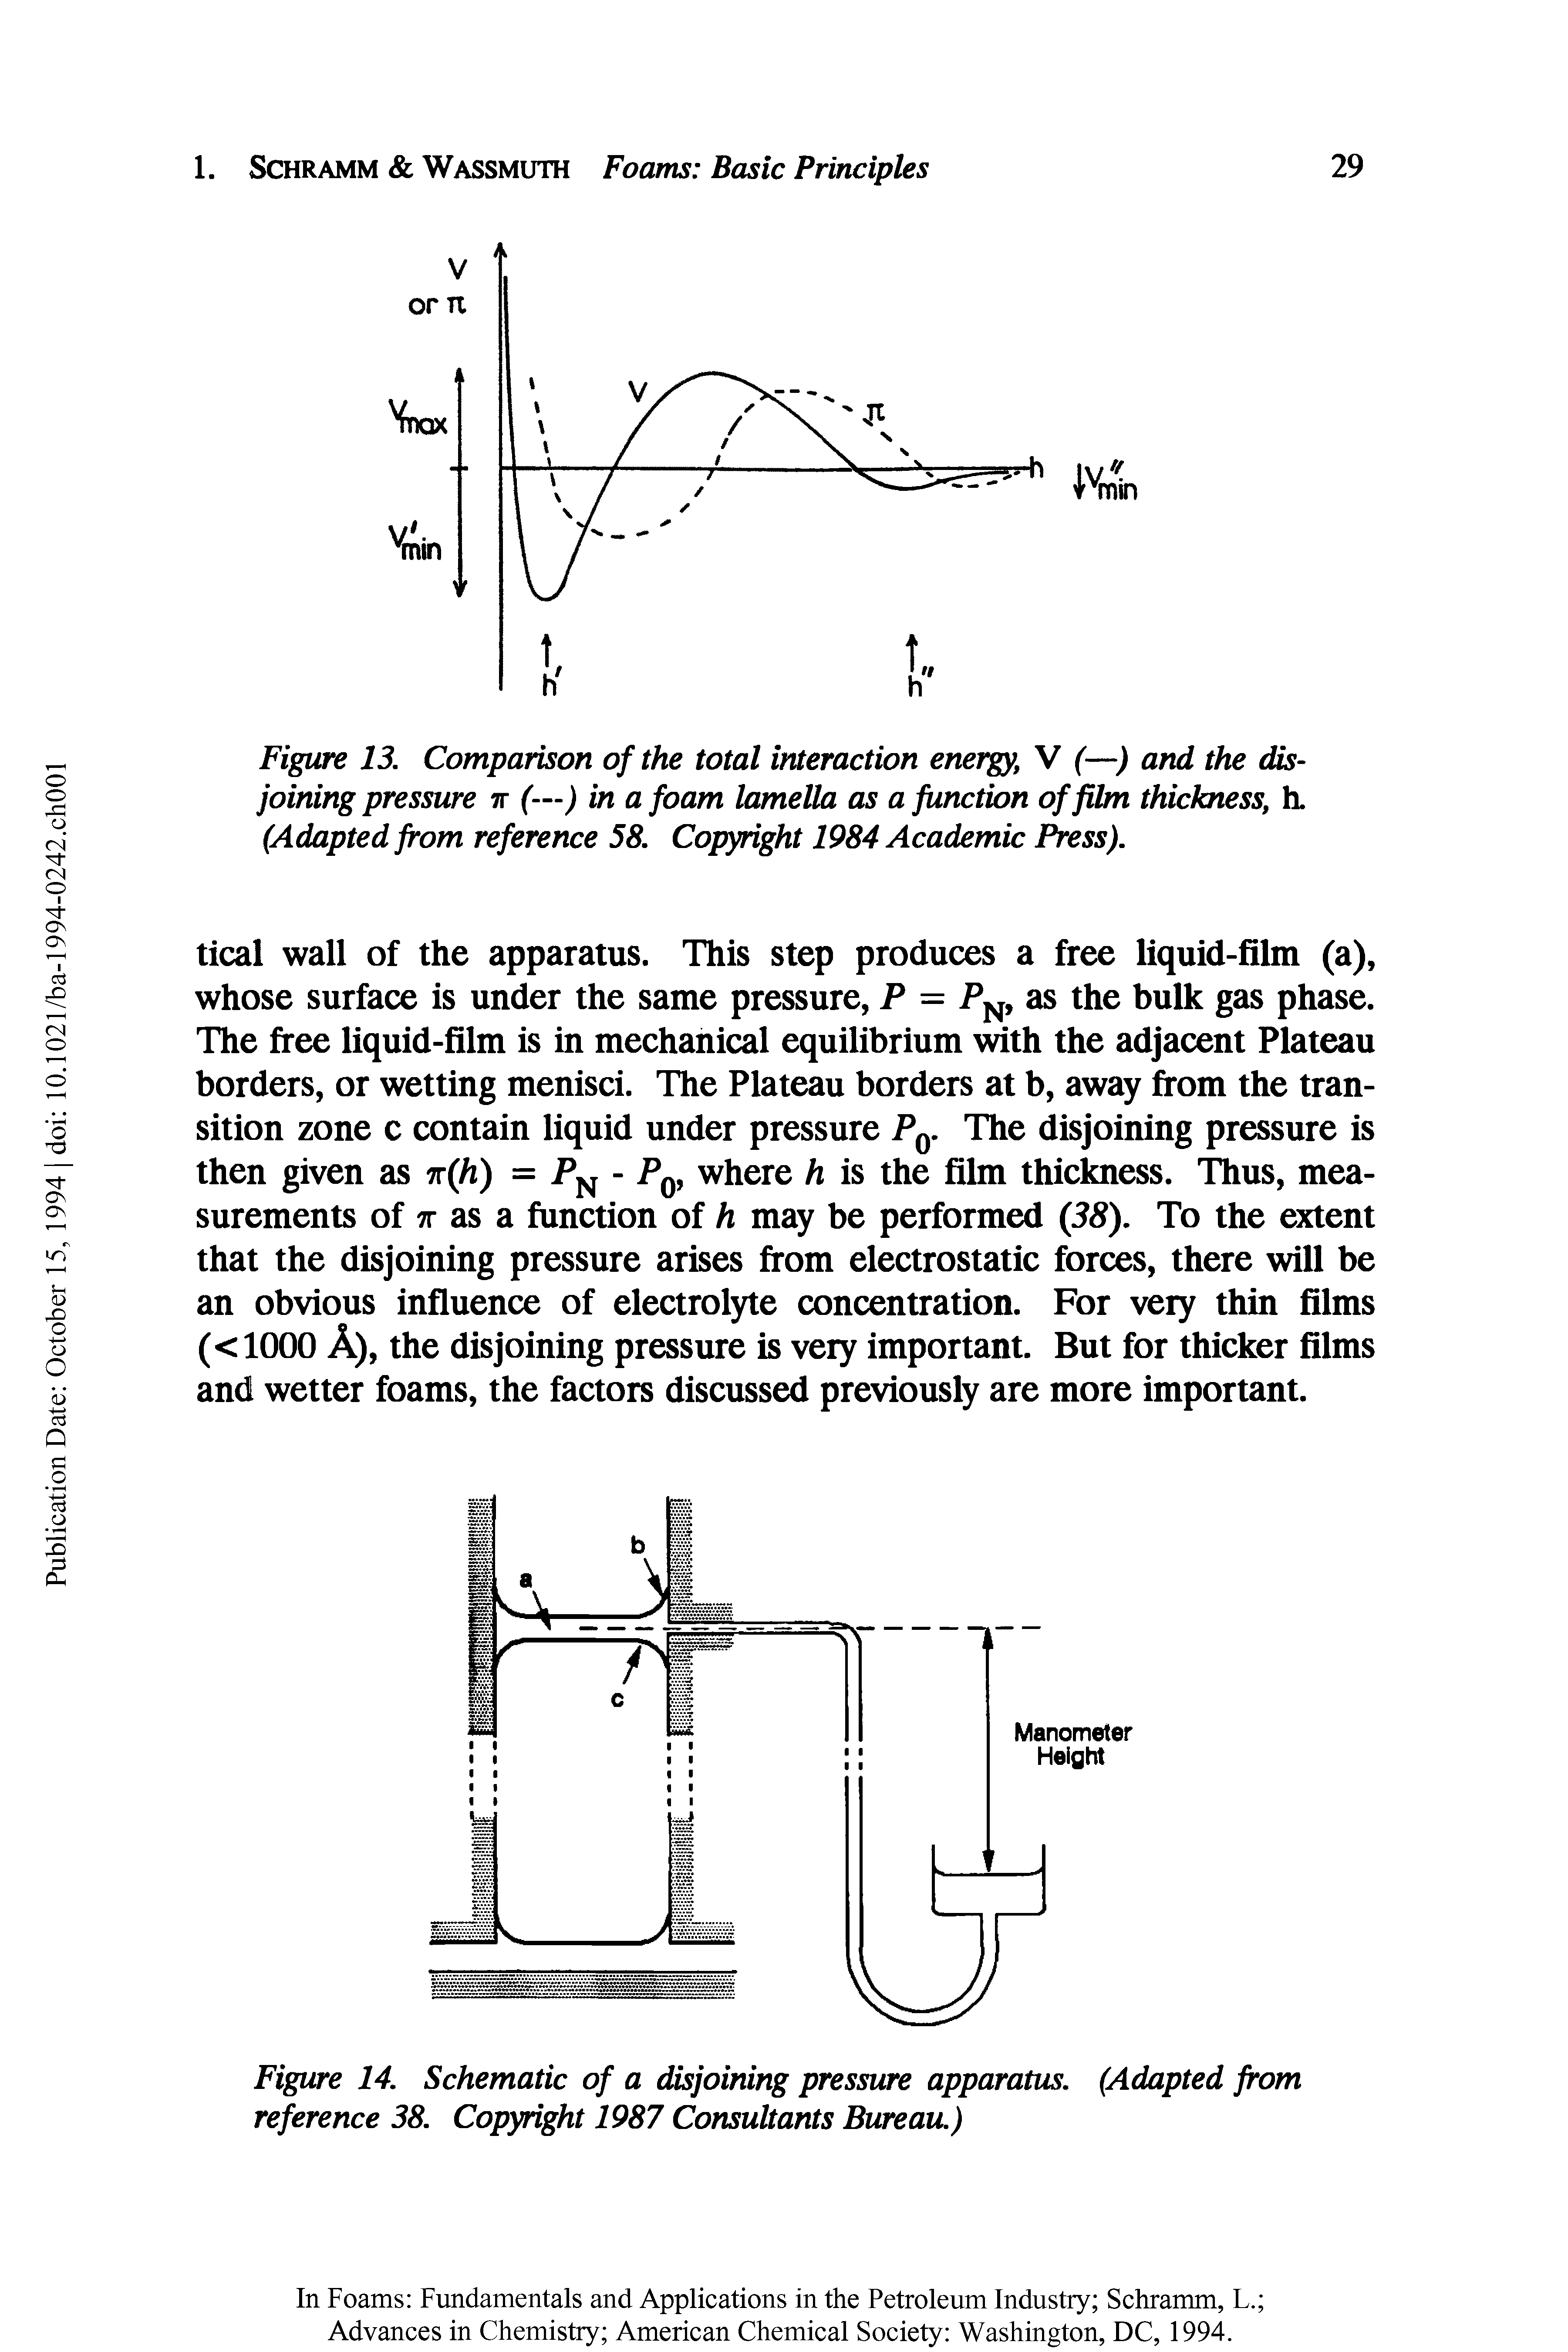 Figure 14. Schematic of a disjoining pressure apparatus. (Adapted from reference 38. Copyright 1987 Consultants Bureau.)...